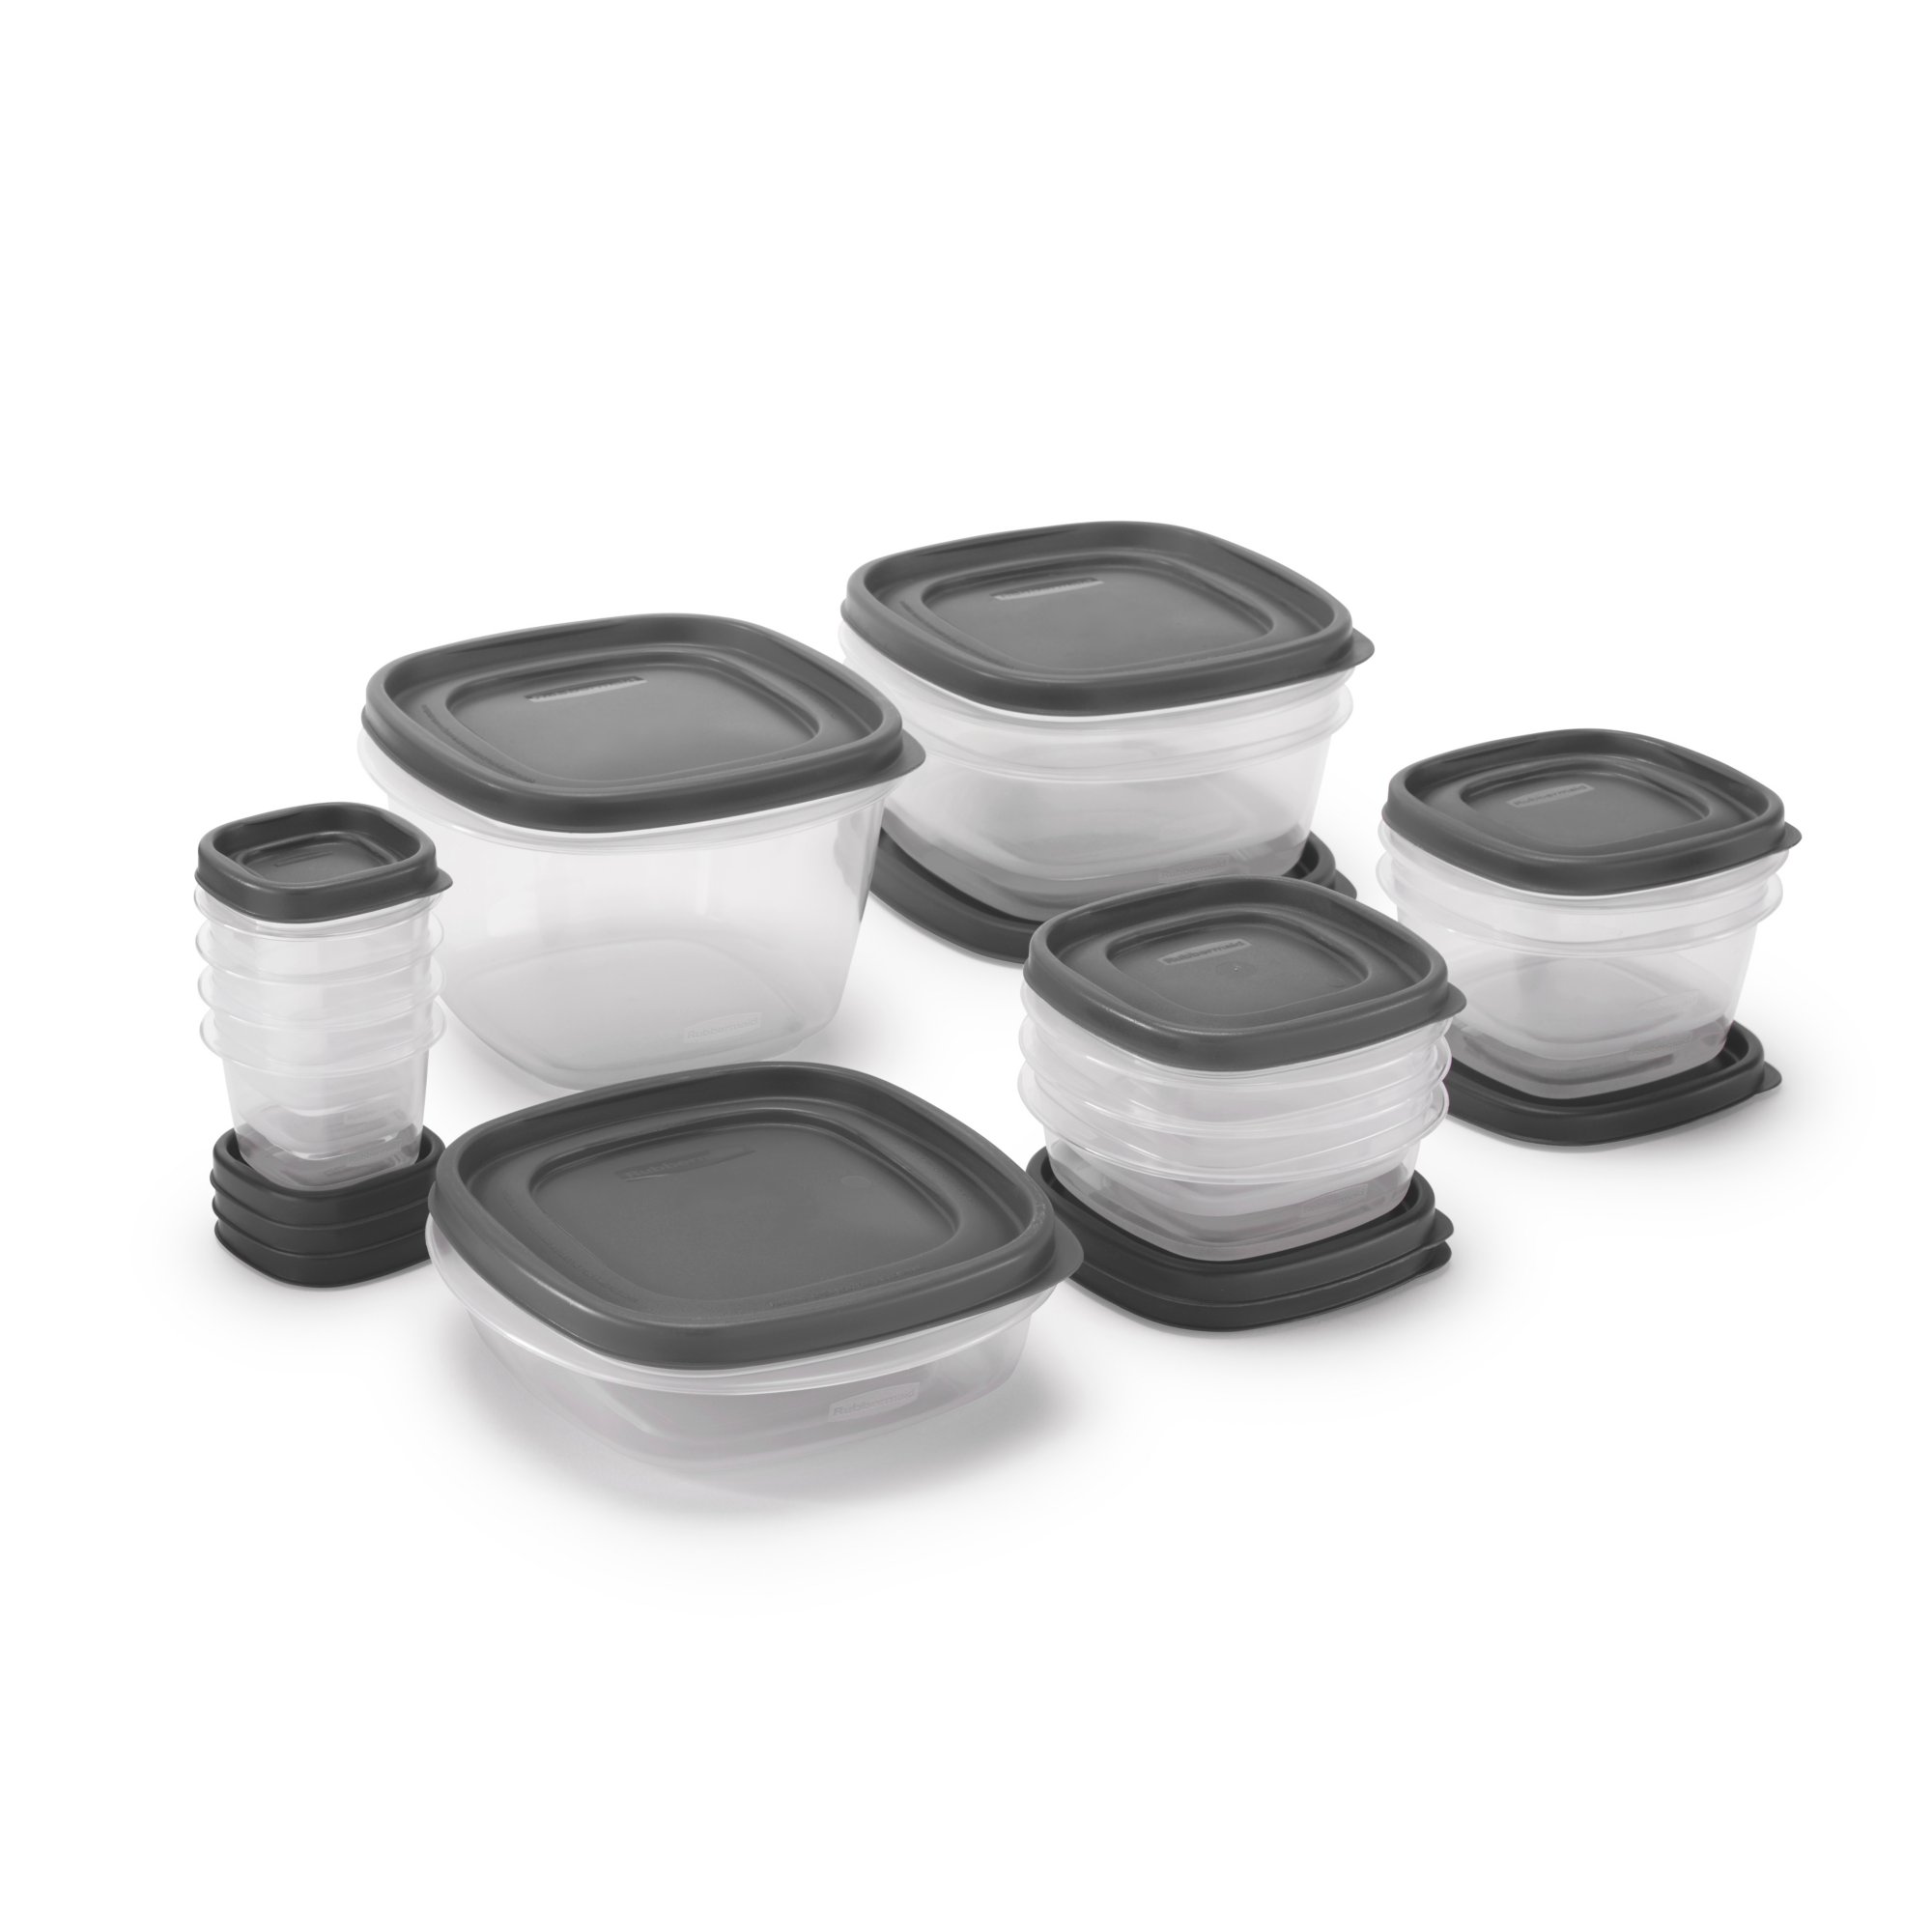  Rubbermaid Premier Easy Find Lids Meal Prep and Food Storage  Containers, Set of 6 (12 Pieces Total), Grey